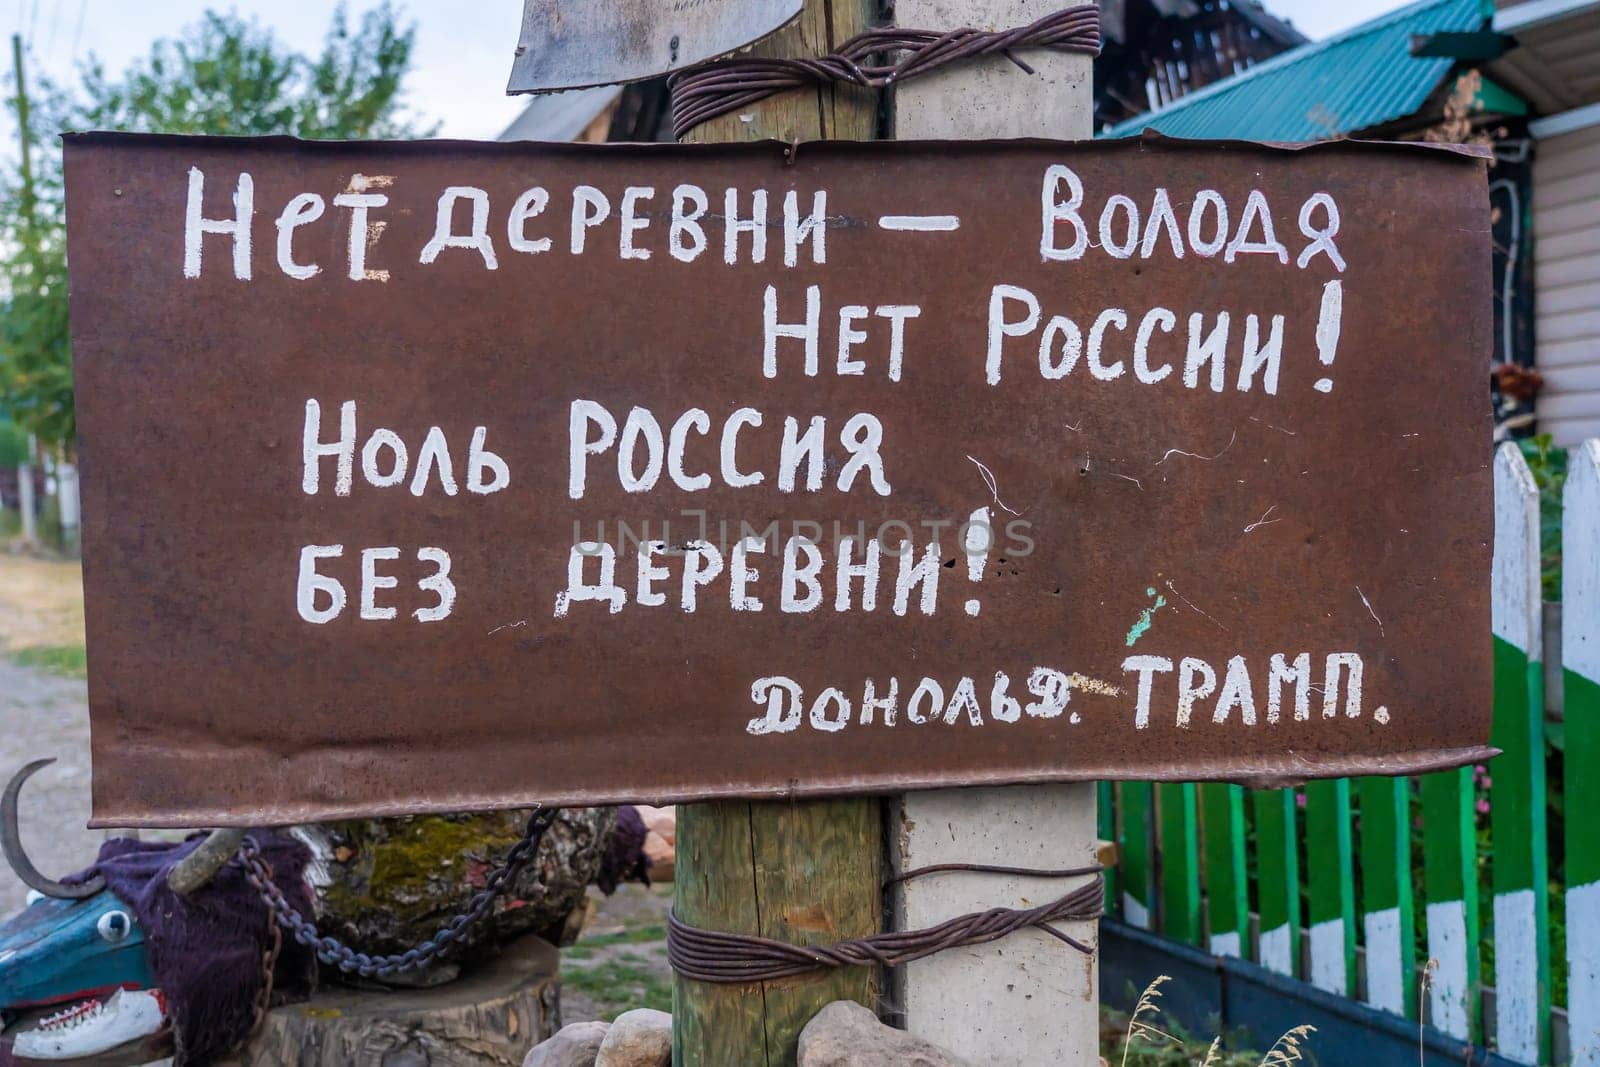 Tyulyuk, Russia - July 22, 2020: Russian funny and humorous inscriptions in the village of Tyulyuk in the South Urals. by DovidPro